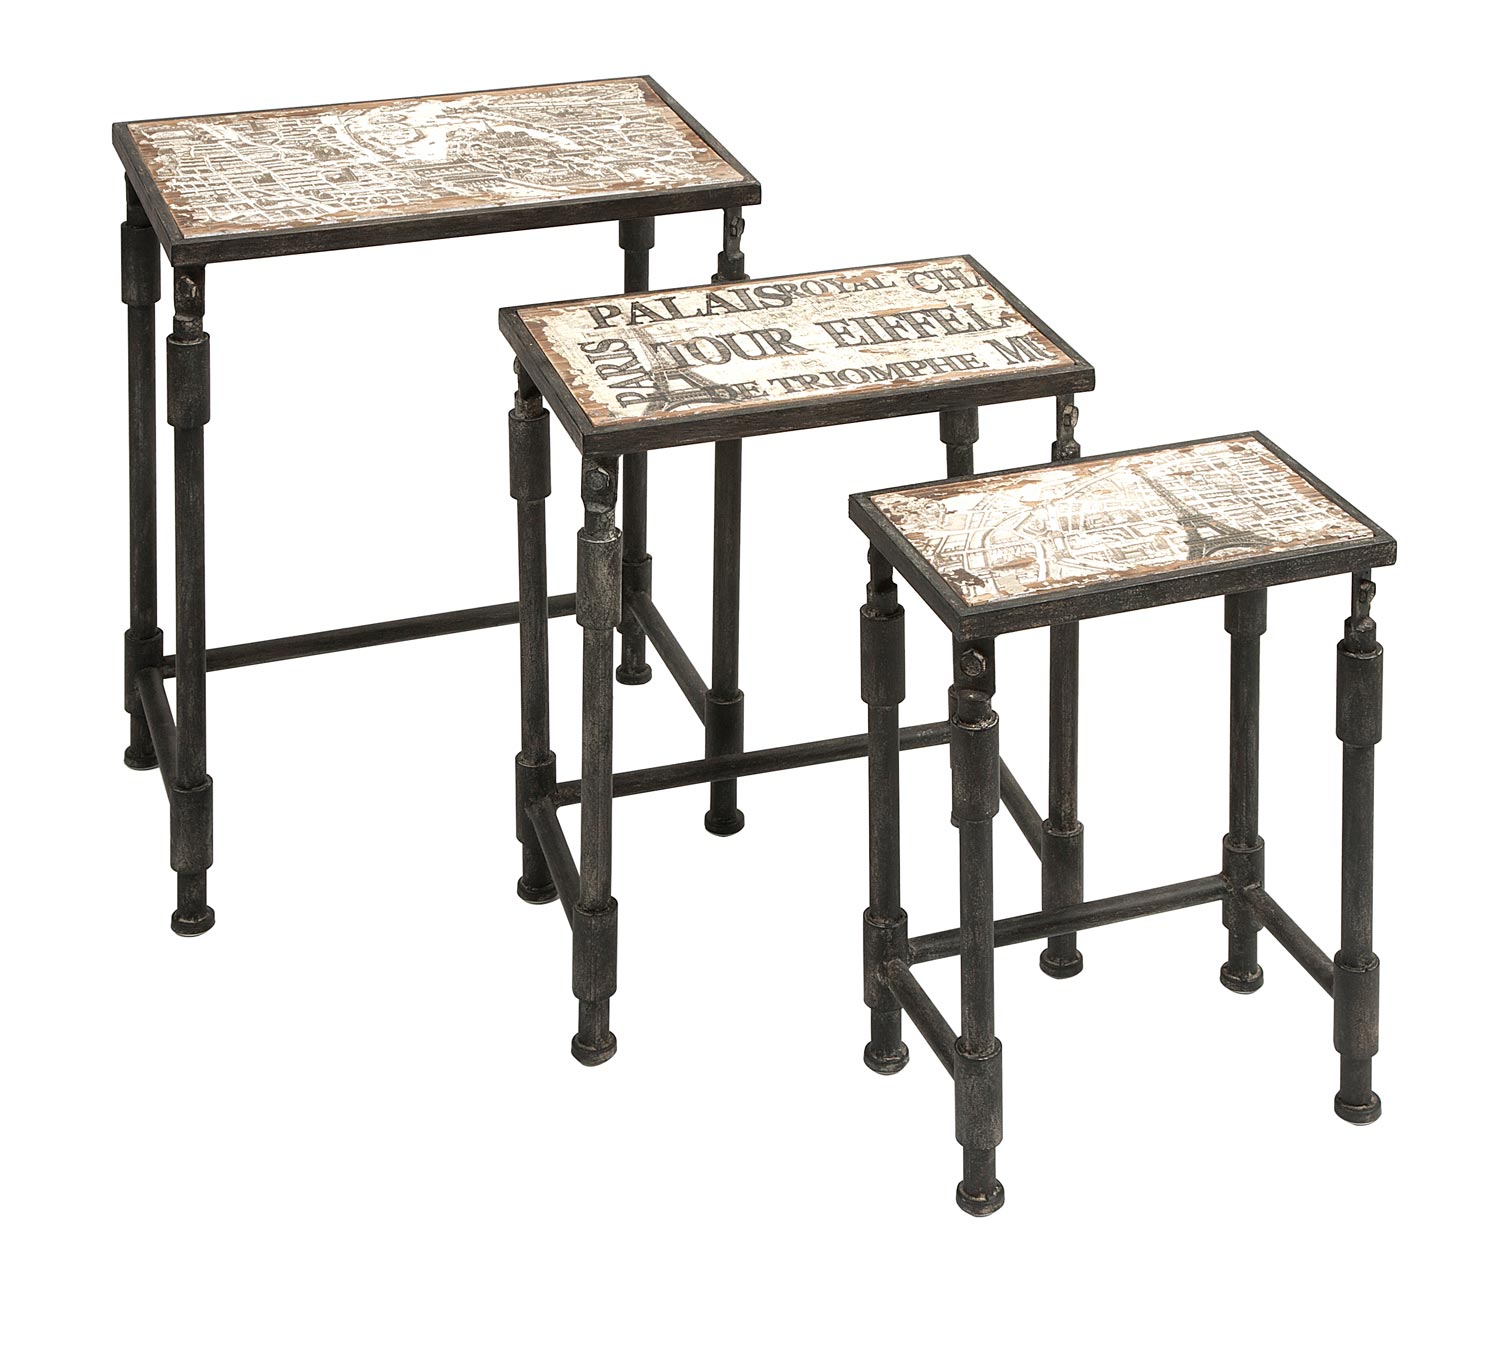 IMAX Knoxlin Nesting Tables - Set of 3